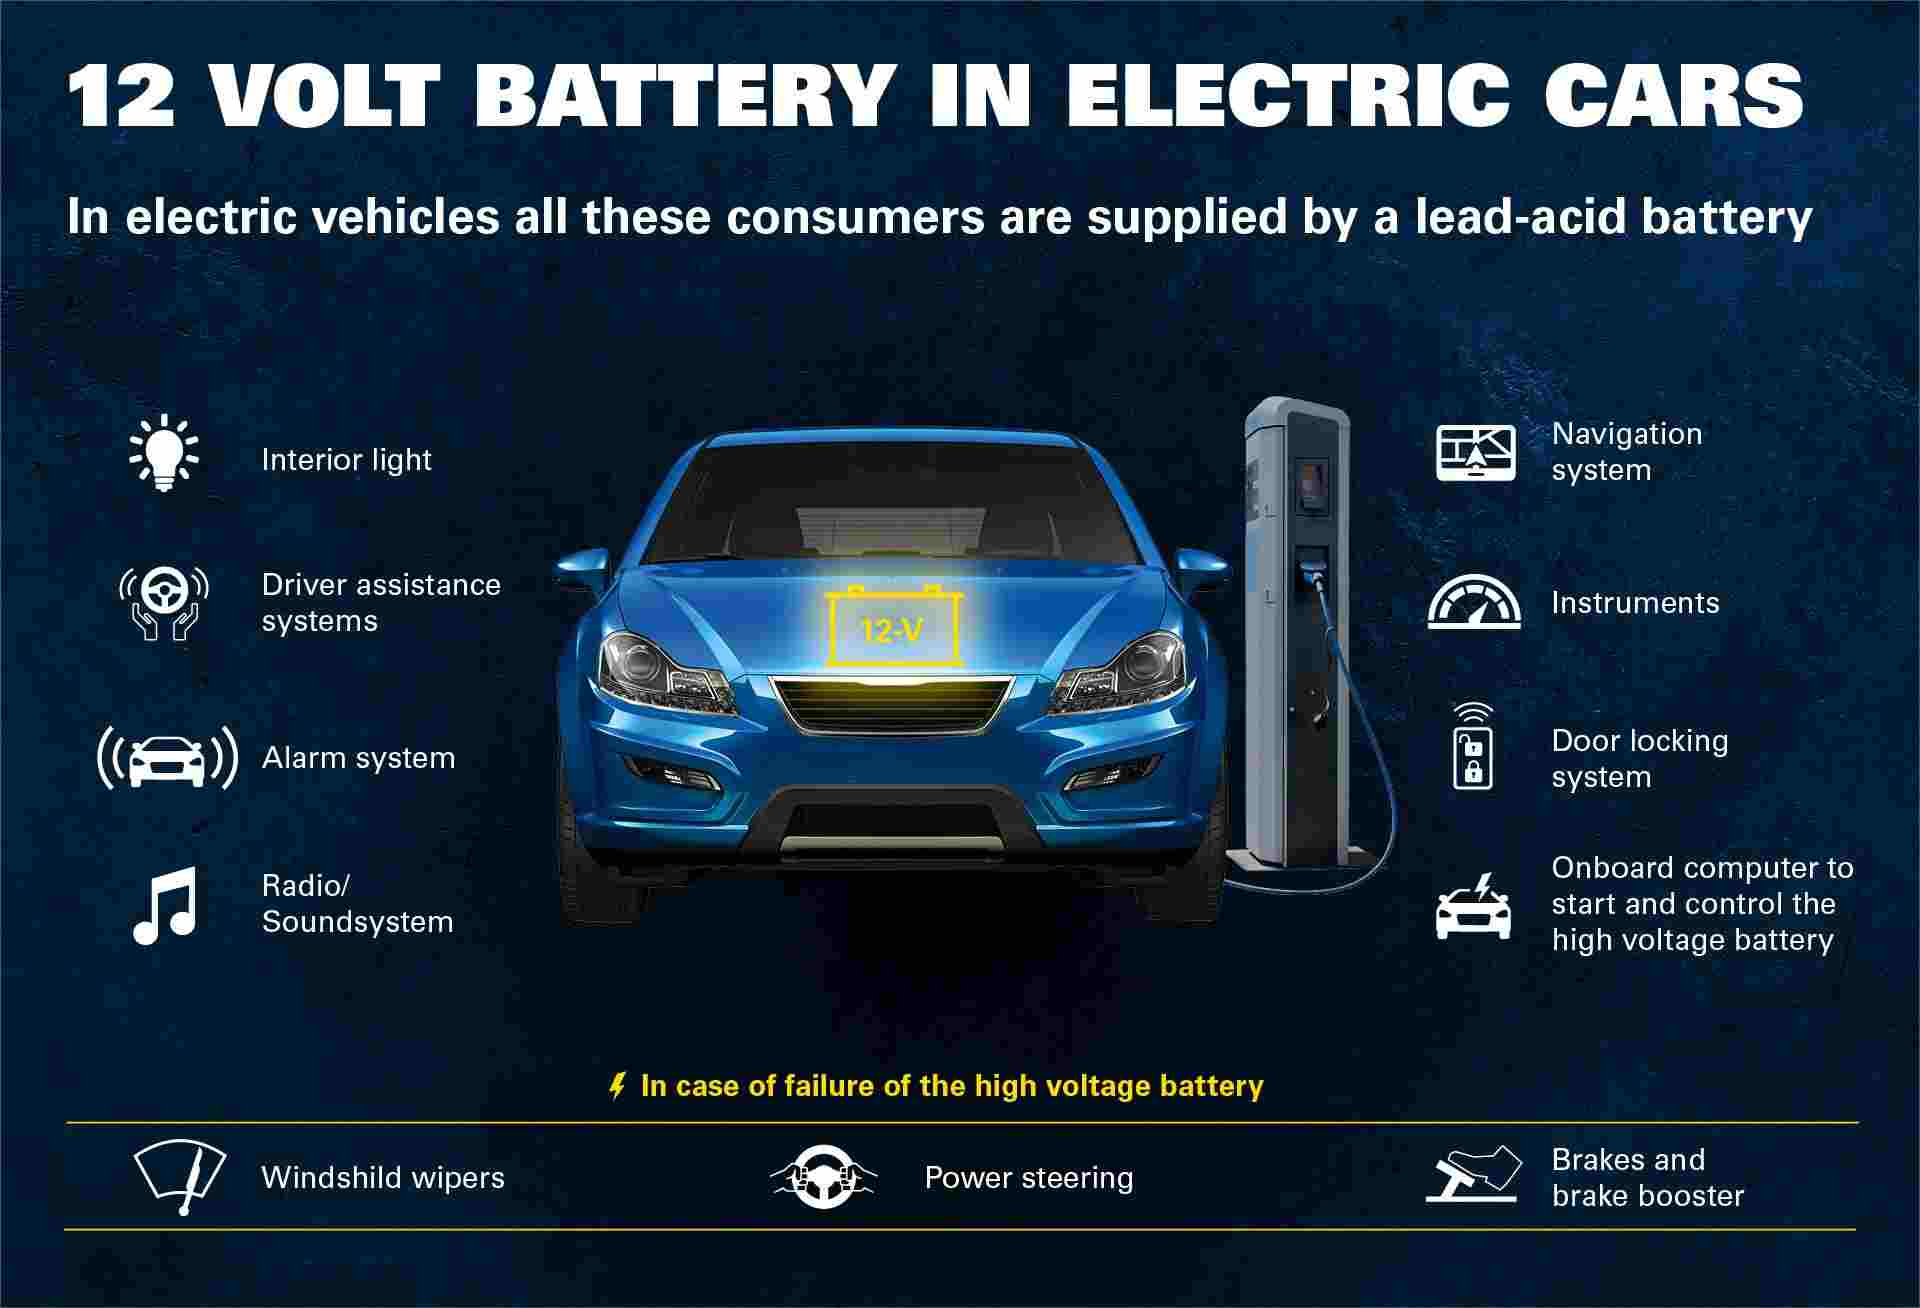 12 volt battery in electric cars